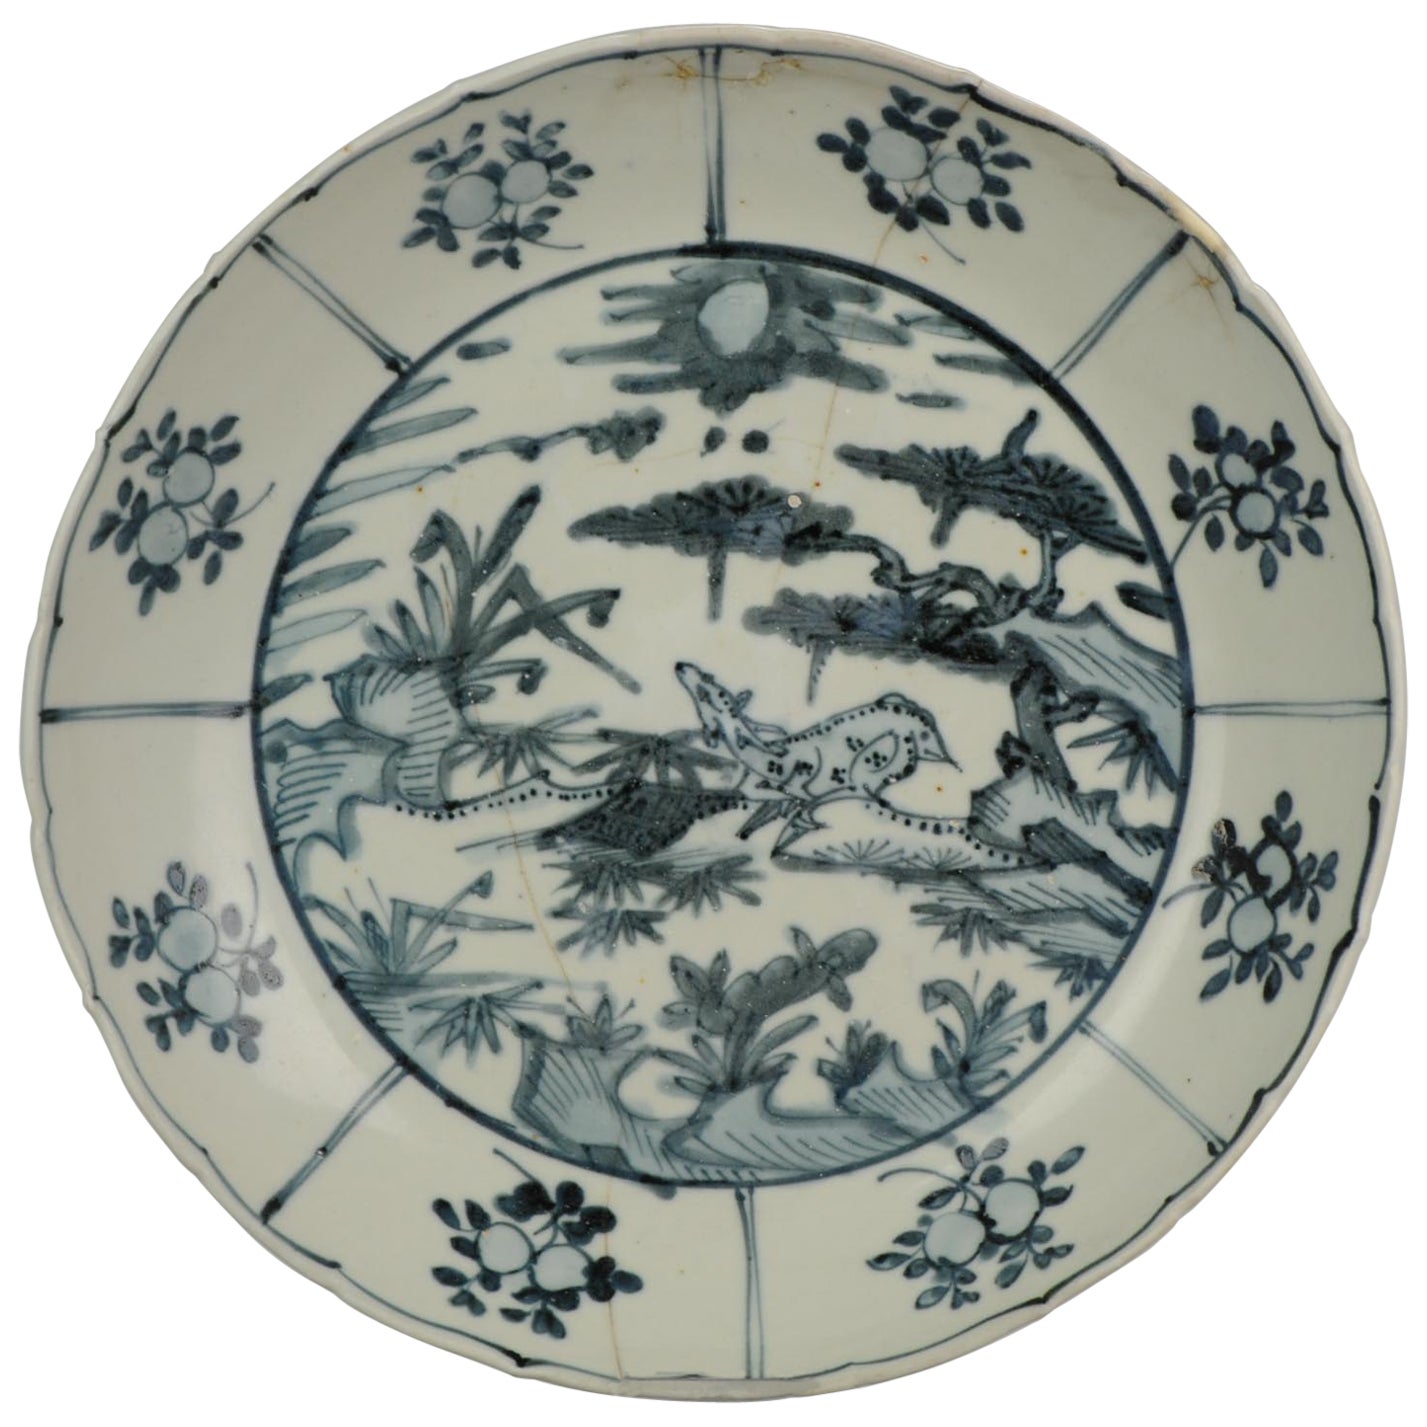 Antique Chinese Porcelain Jiajing/Wanli Ming Swatow Large Plate, 16/17th Century For Sale